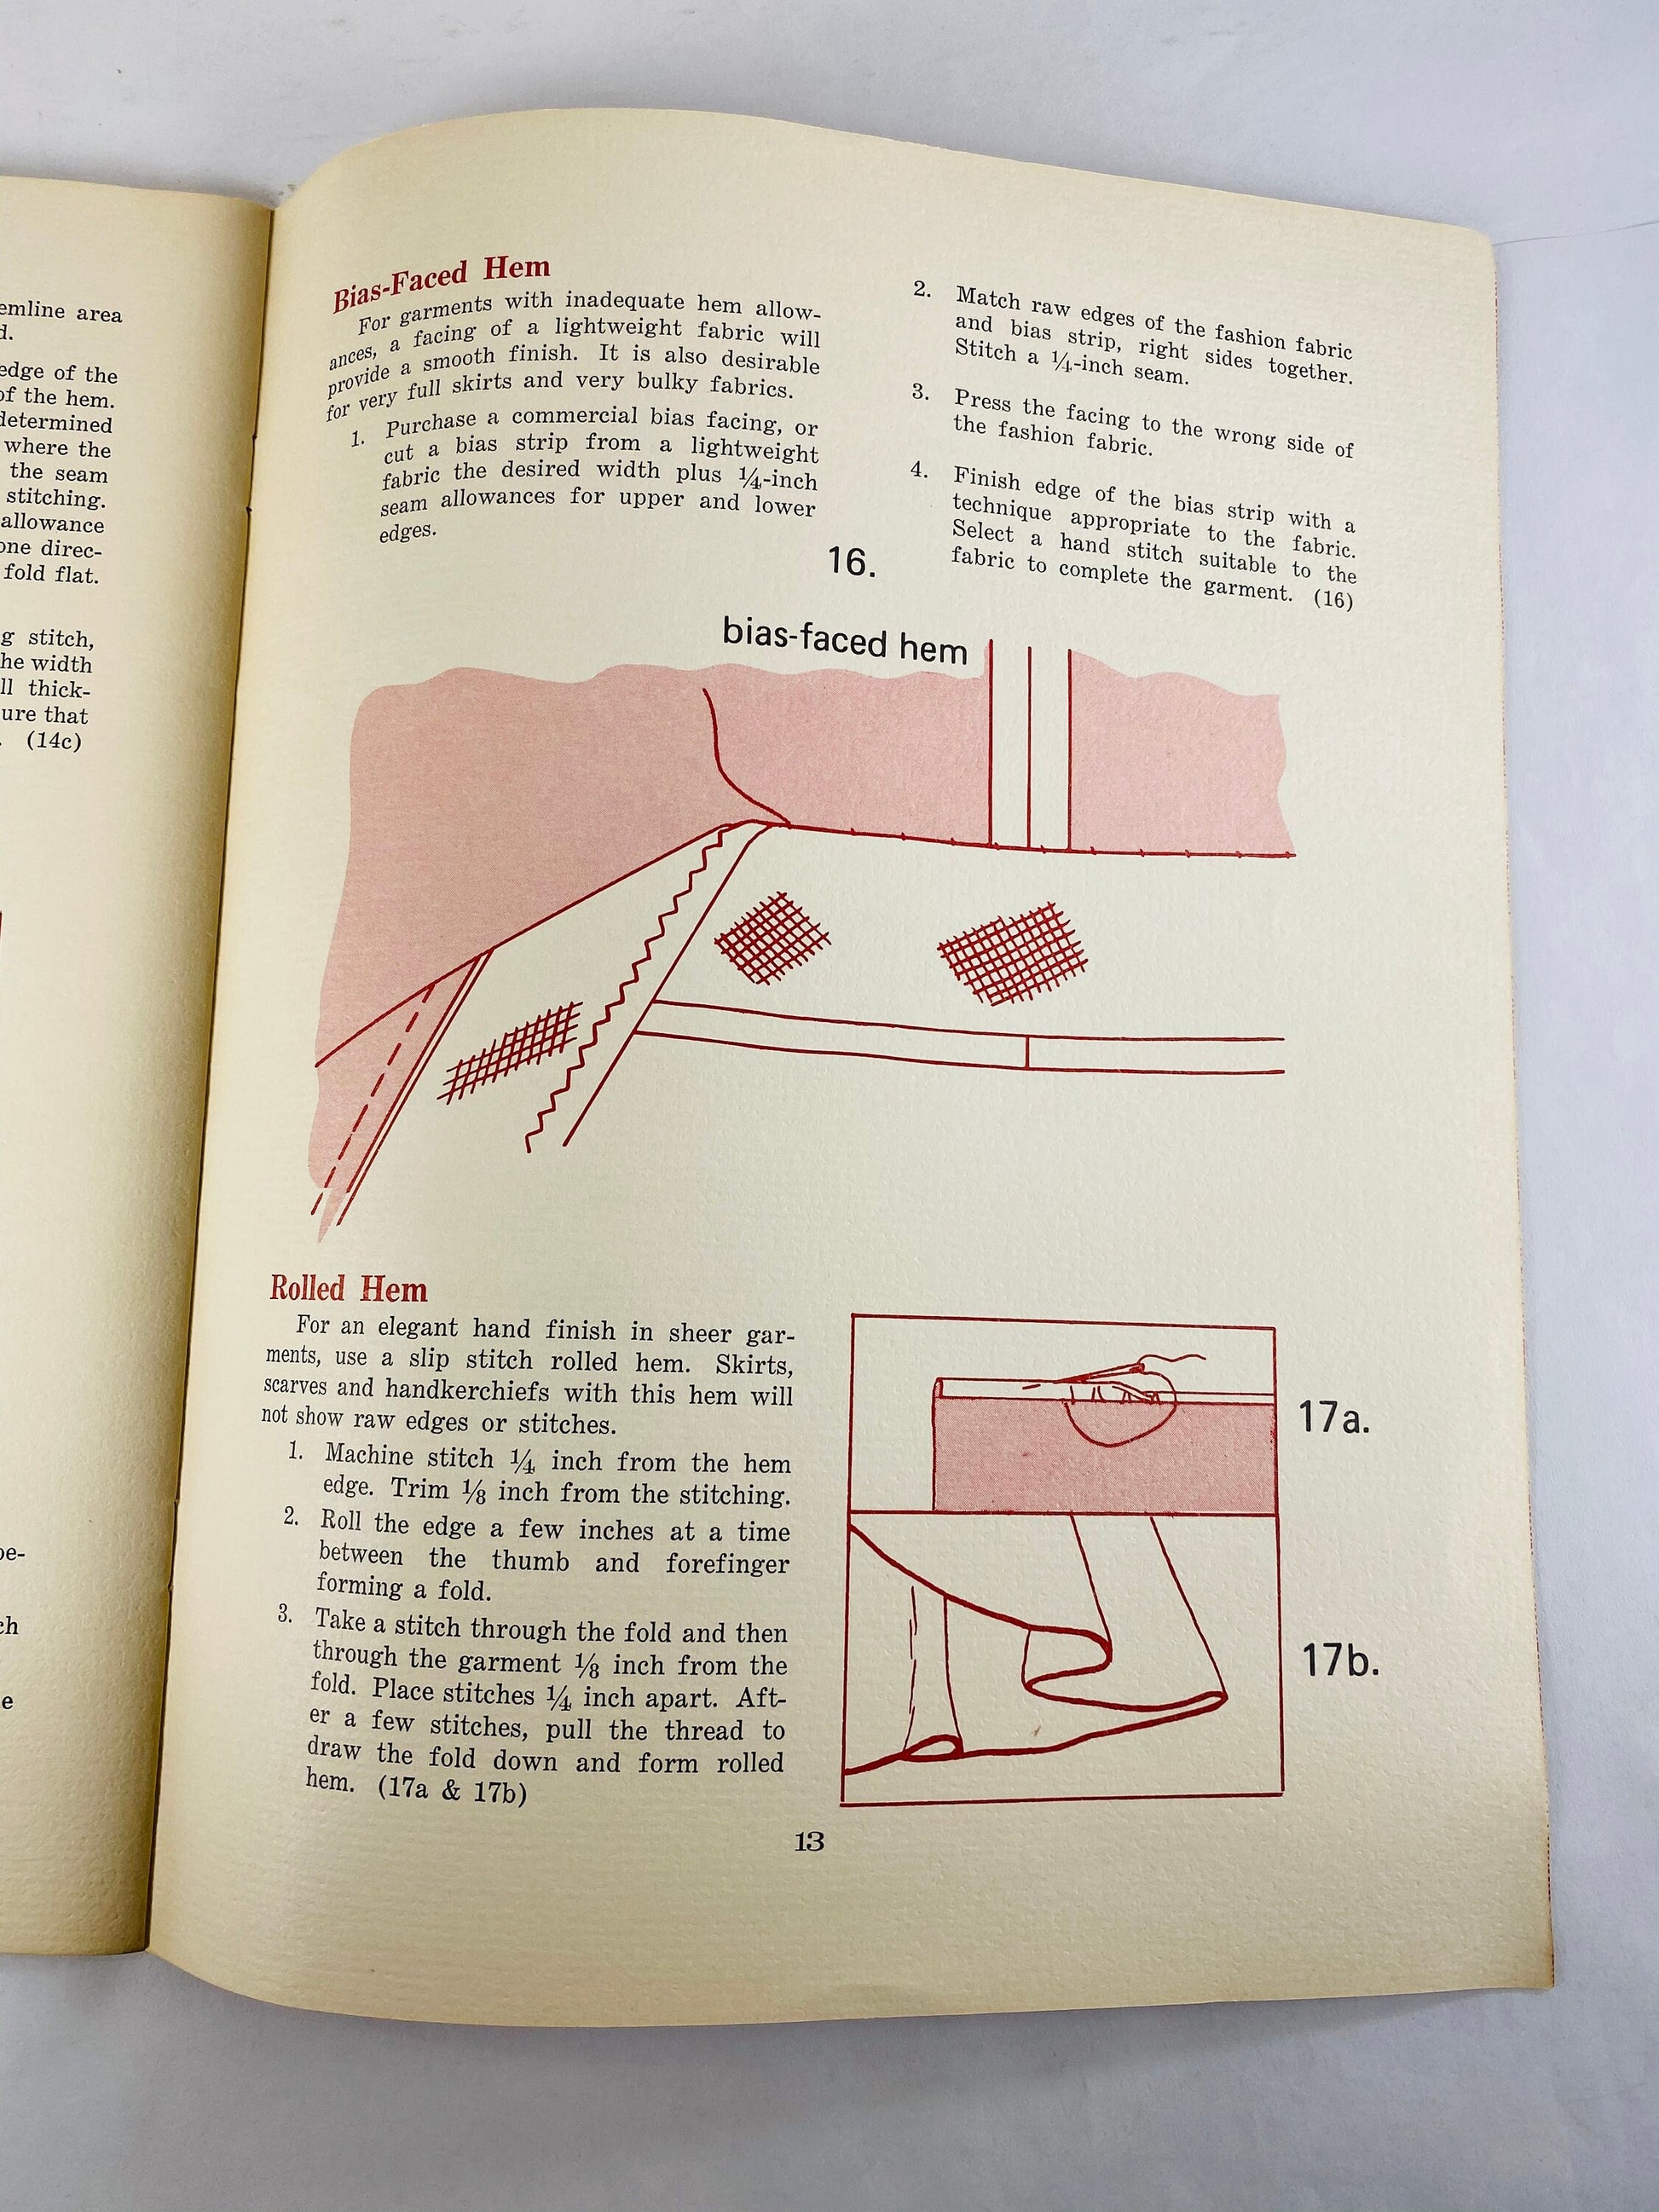 Hems by Roxanne Schnorr Texas A&M University Vintage booklet circa 1972. Collectible sewing book with techniques